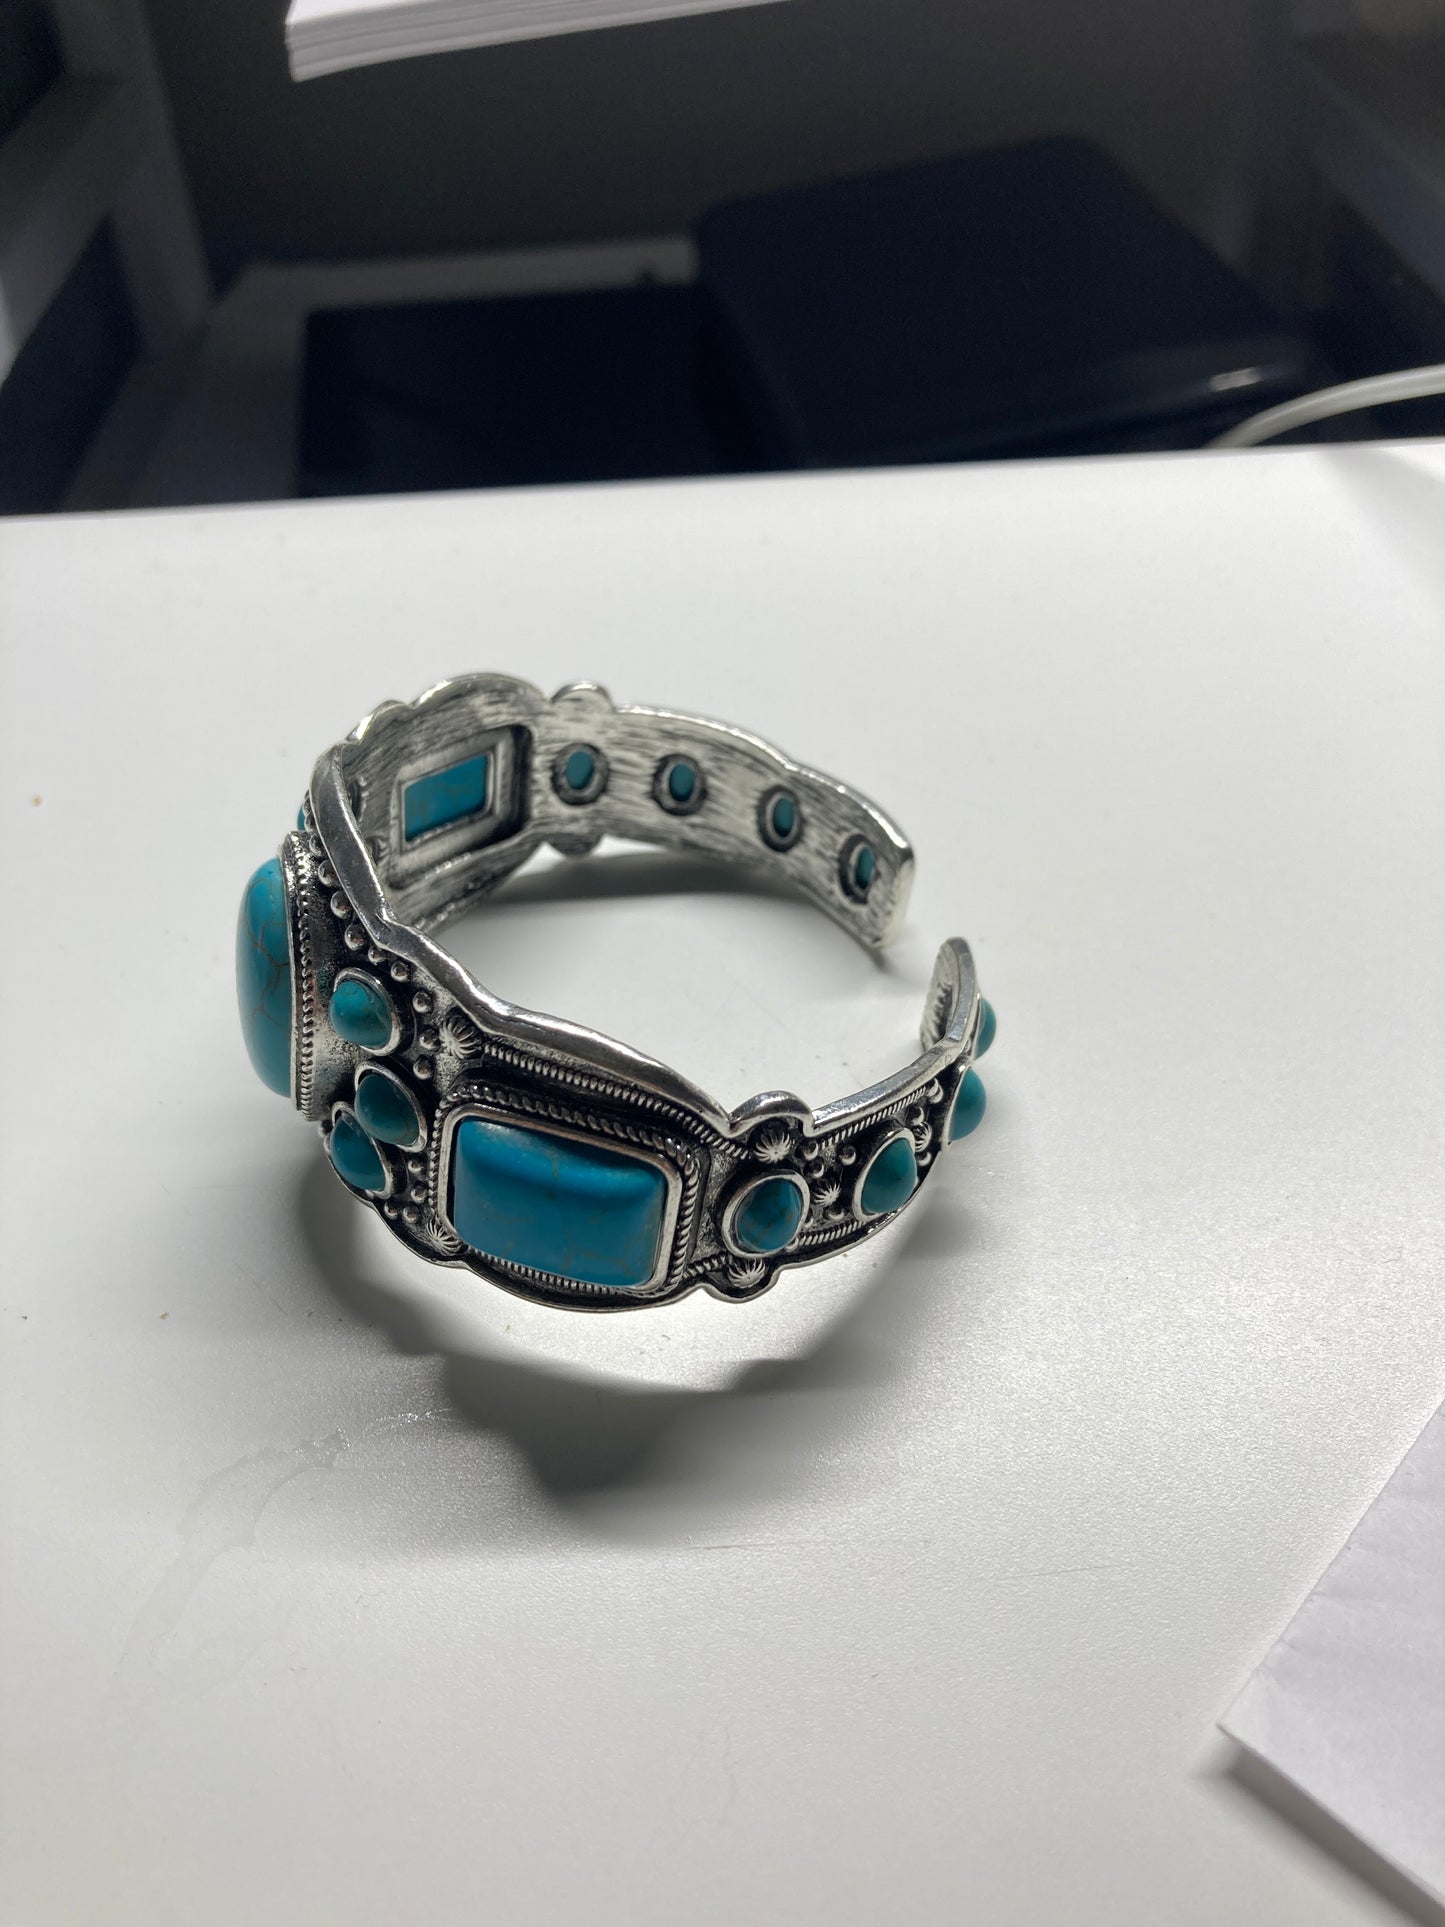 Indian turquoise and silver cuff bracelet